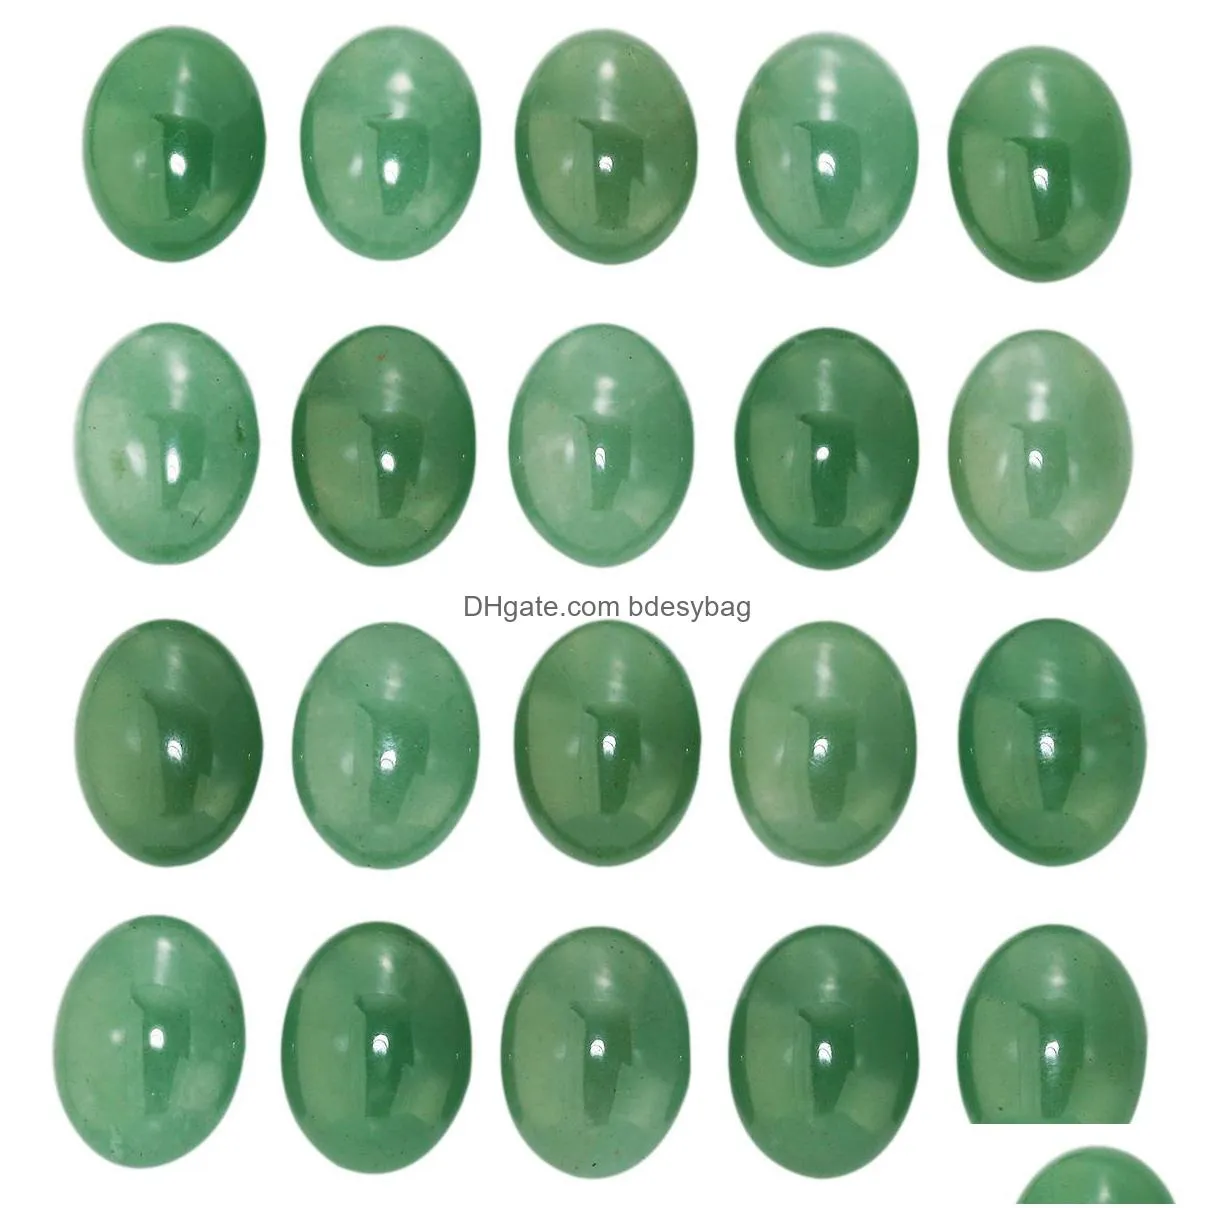 natural oval flat back gemstone cabochons 25x18mm healing chakra crystal stone bead cab covers no hole for jewelry craft making amethyst